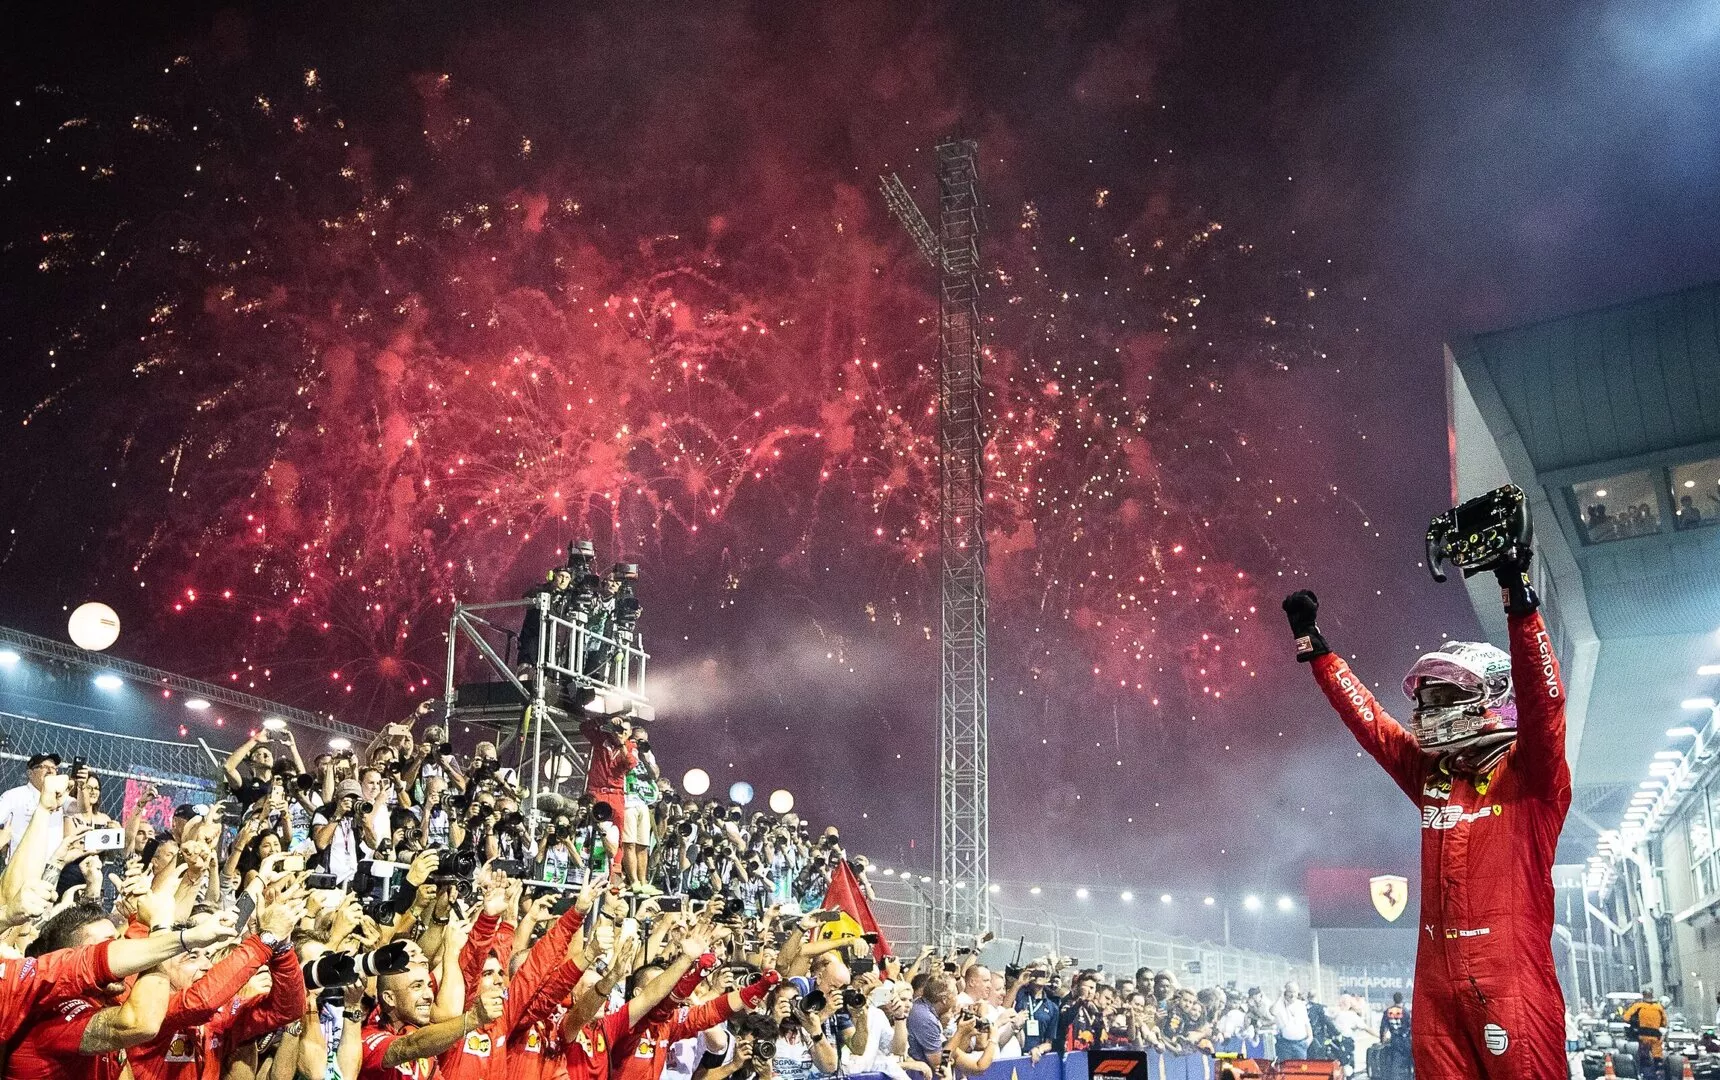 Top 10 most memorable moments at F1 Singapore GP